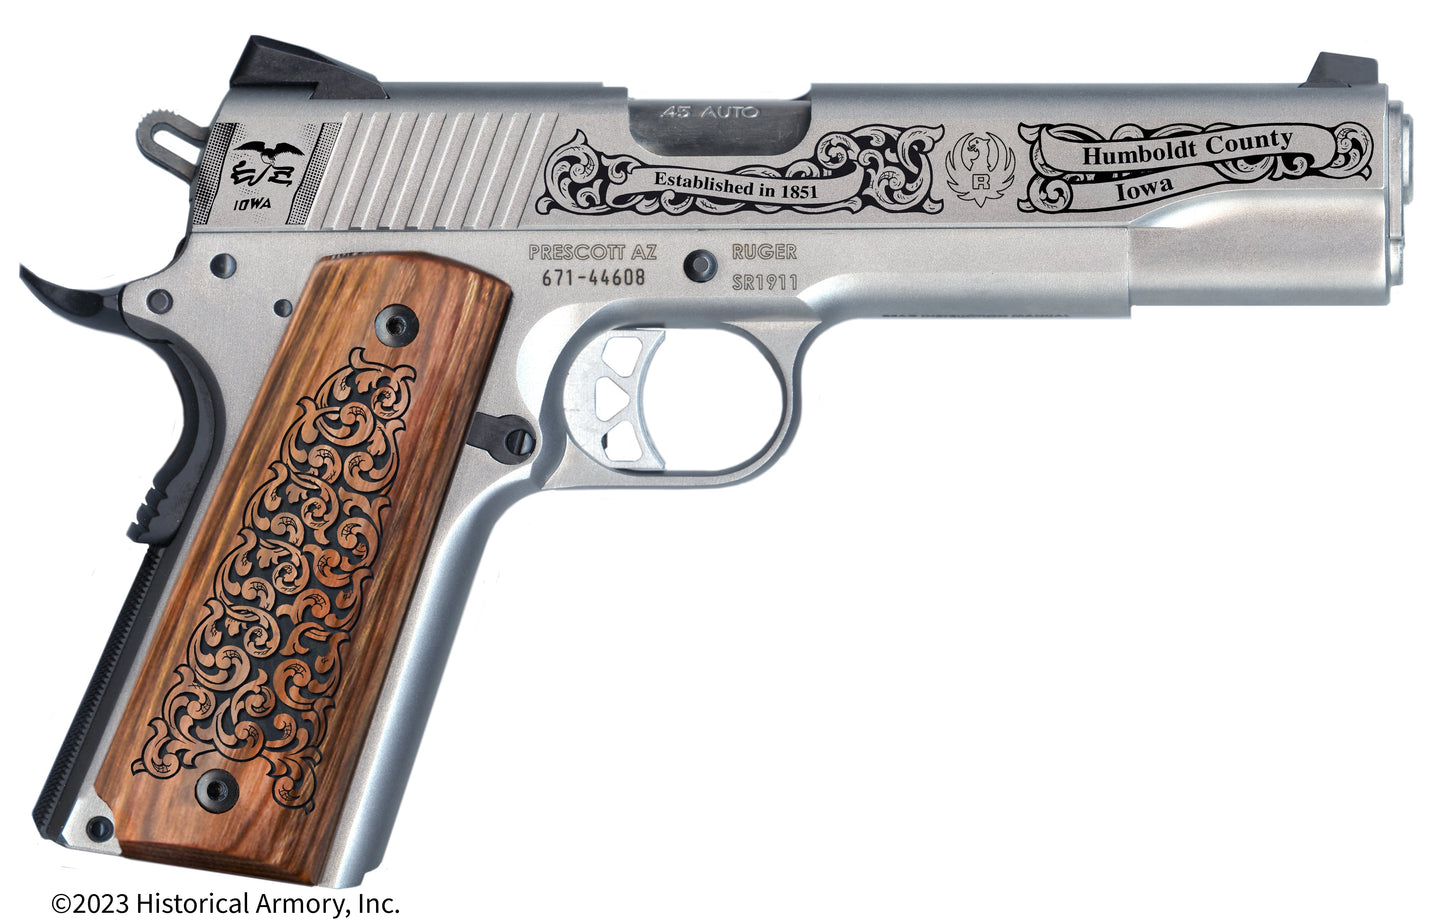 Humboldt County Iowa Engraved .45 Auto Ruger 1911